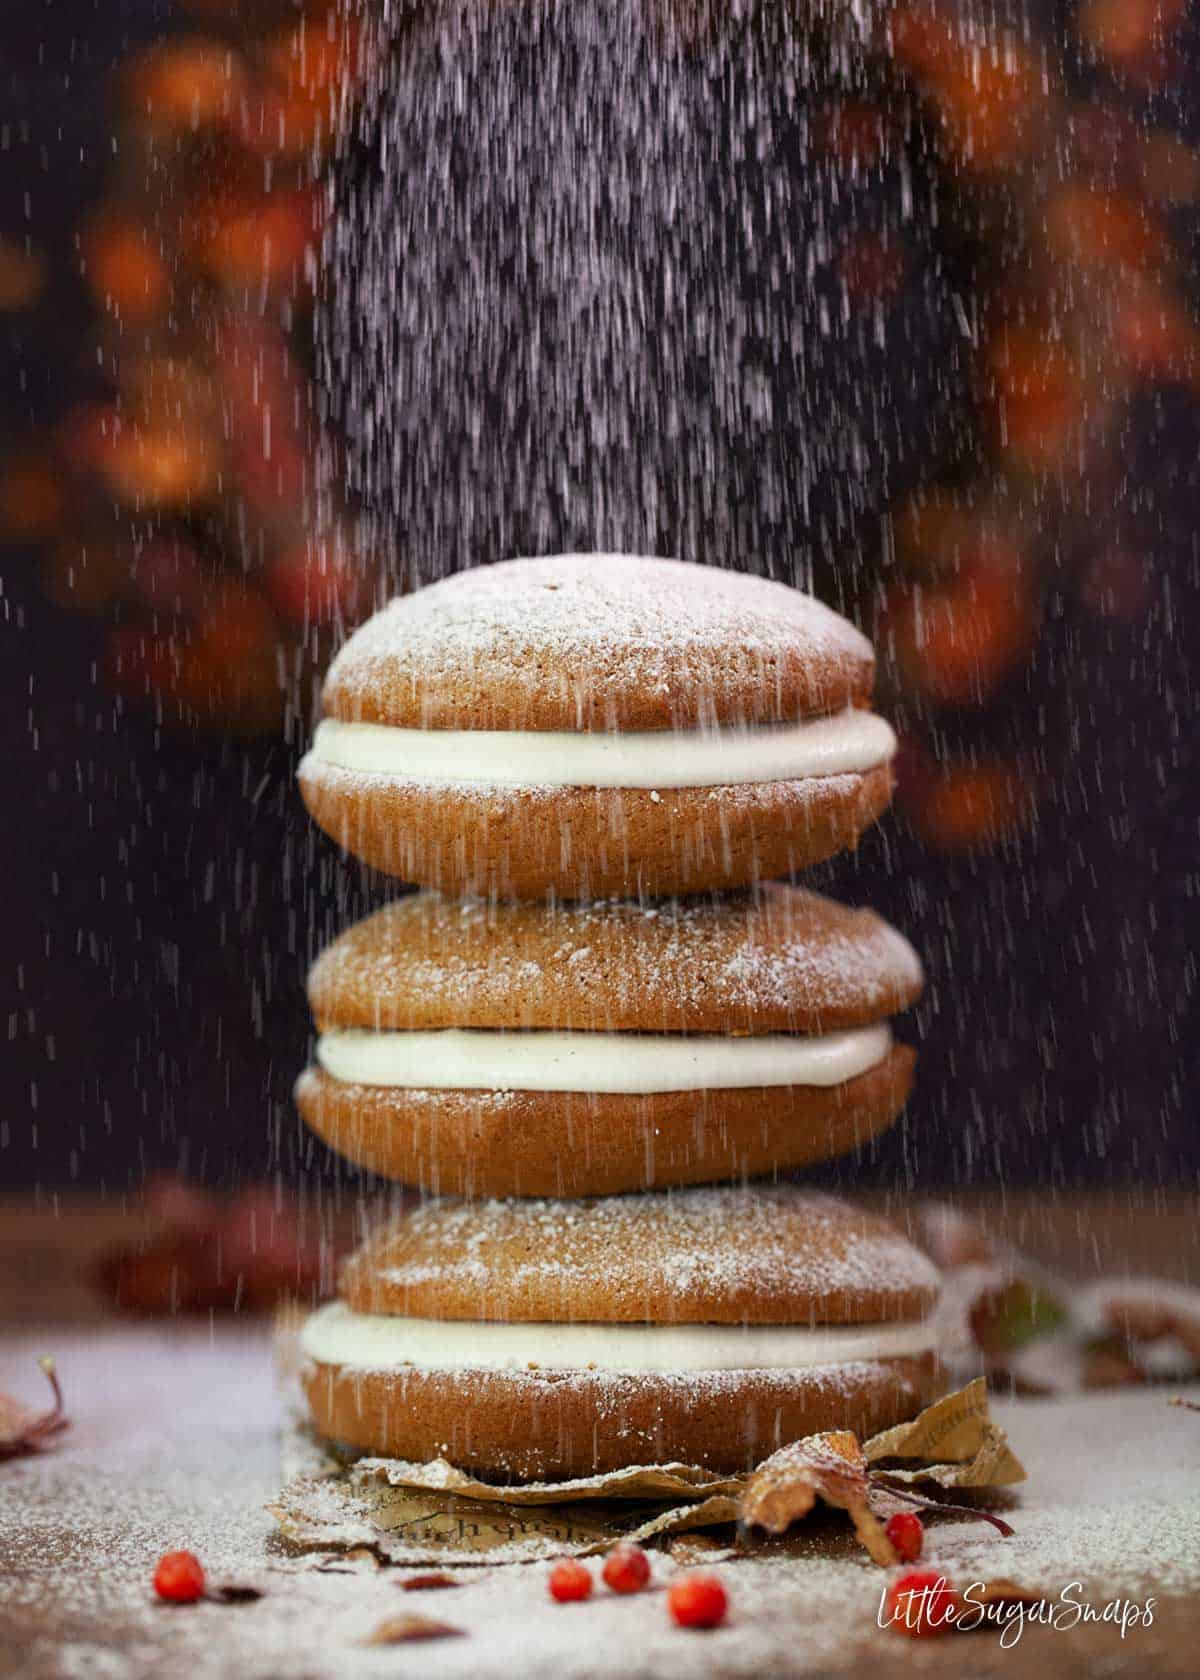 Dredging pumpkin flavoured Maine whoopie pies with icing sugar